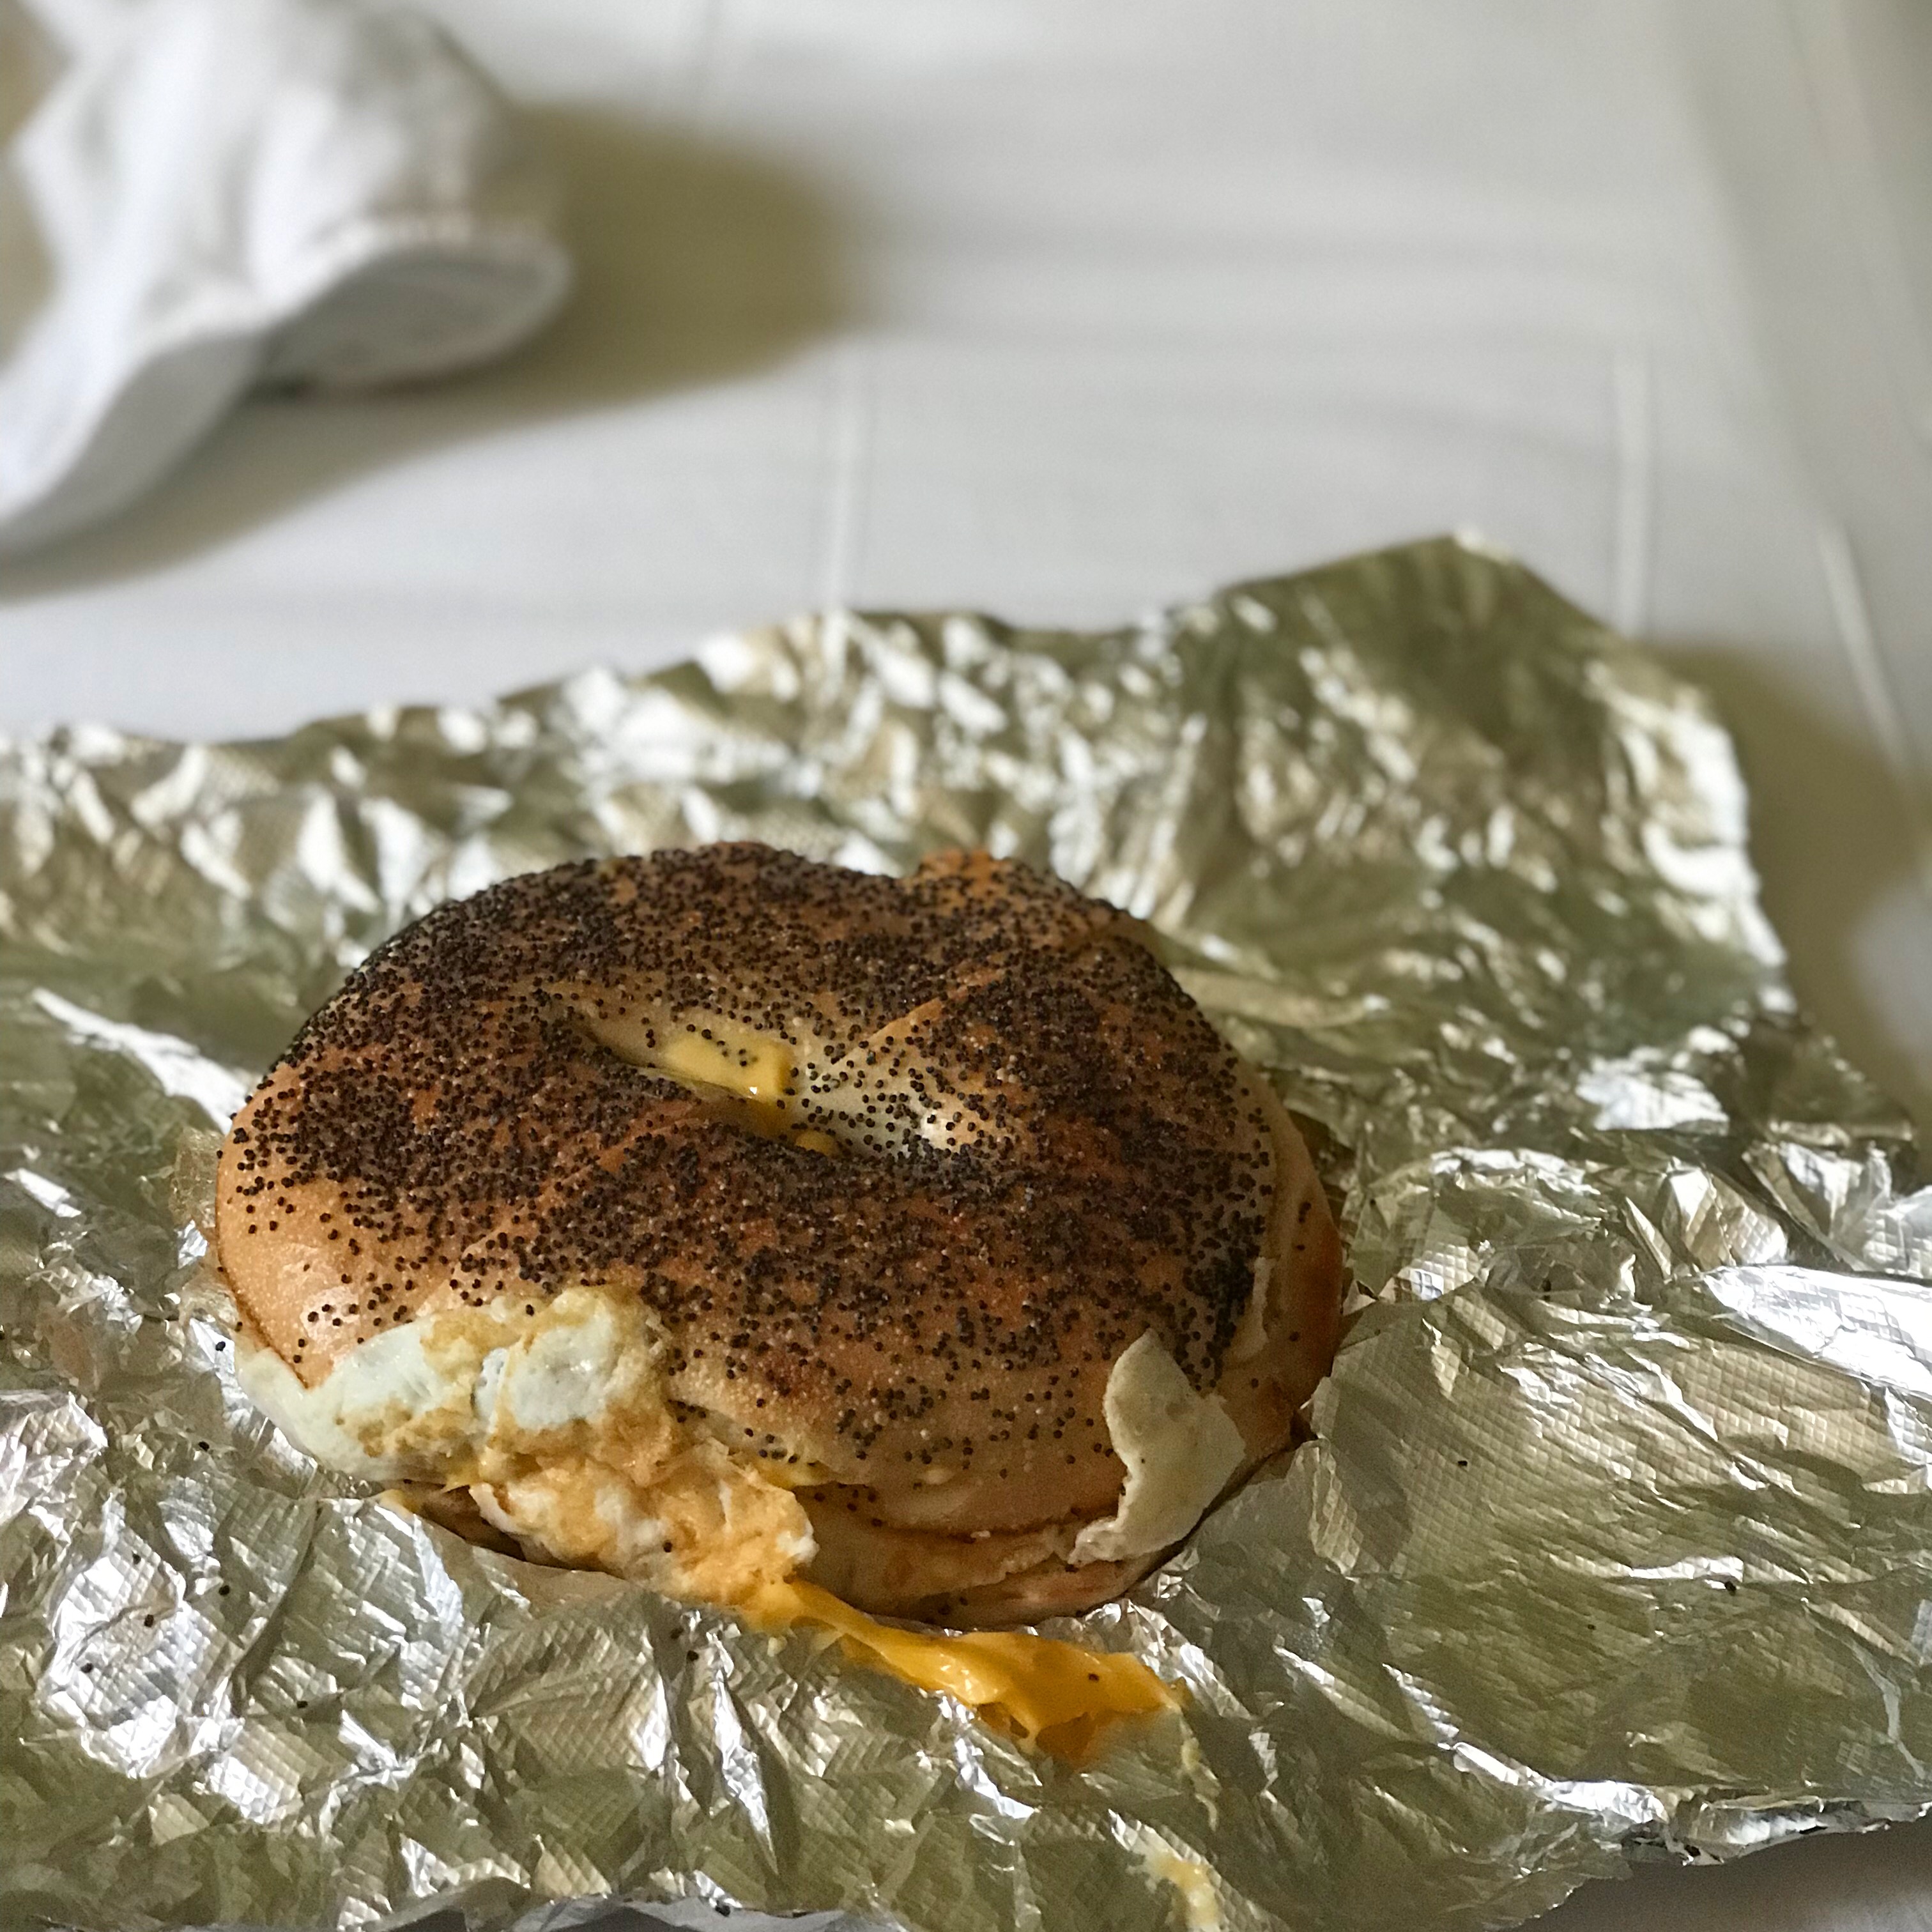 bagel egg and cheese on foil wrapper, sitting on hotel room bed